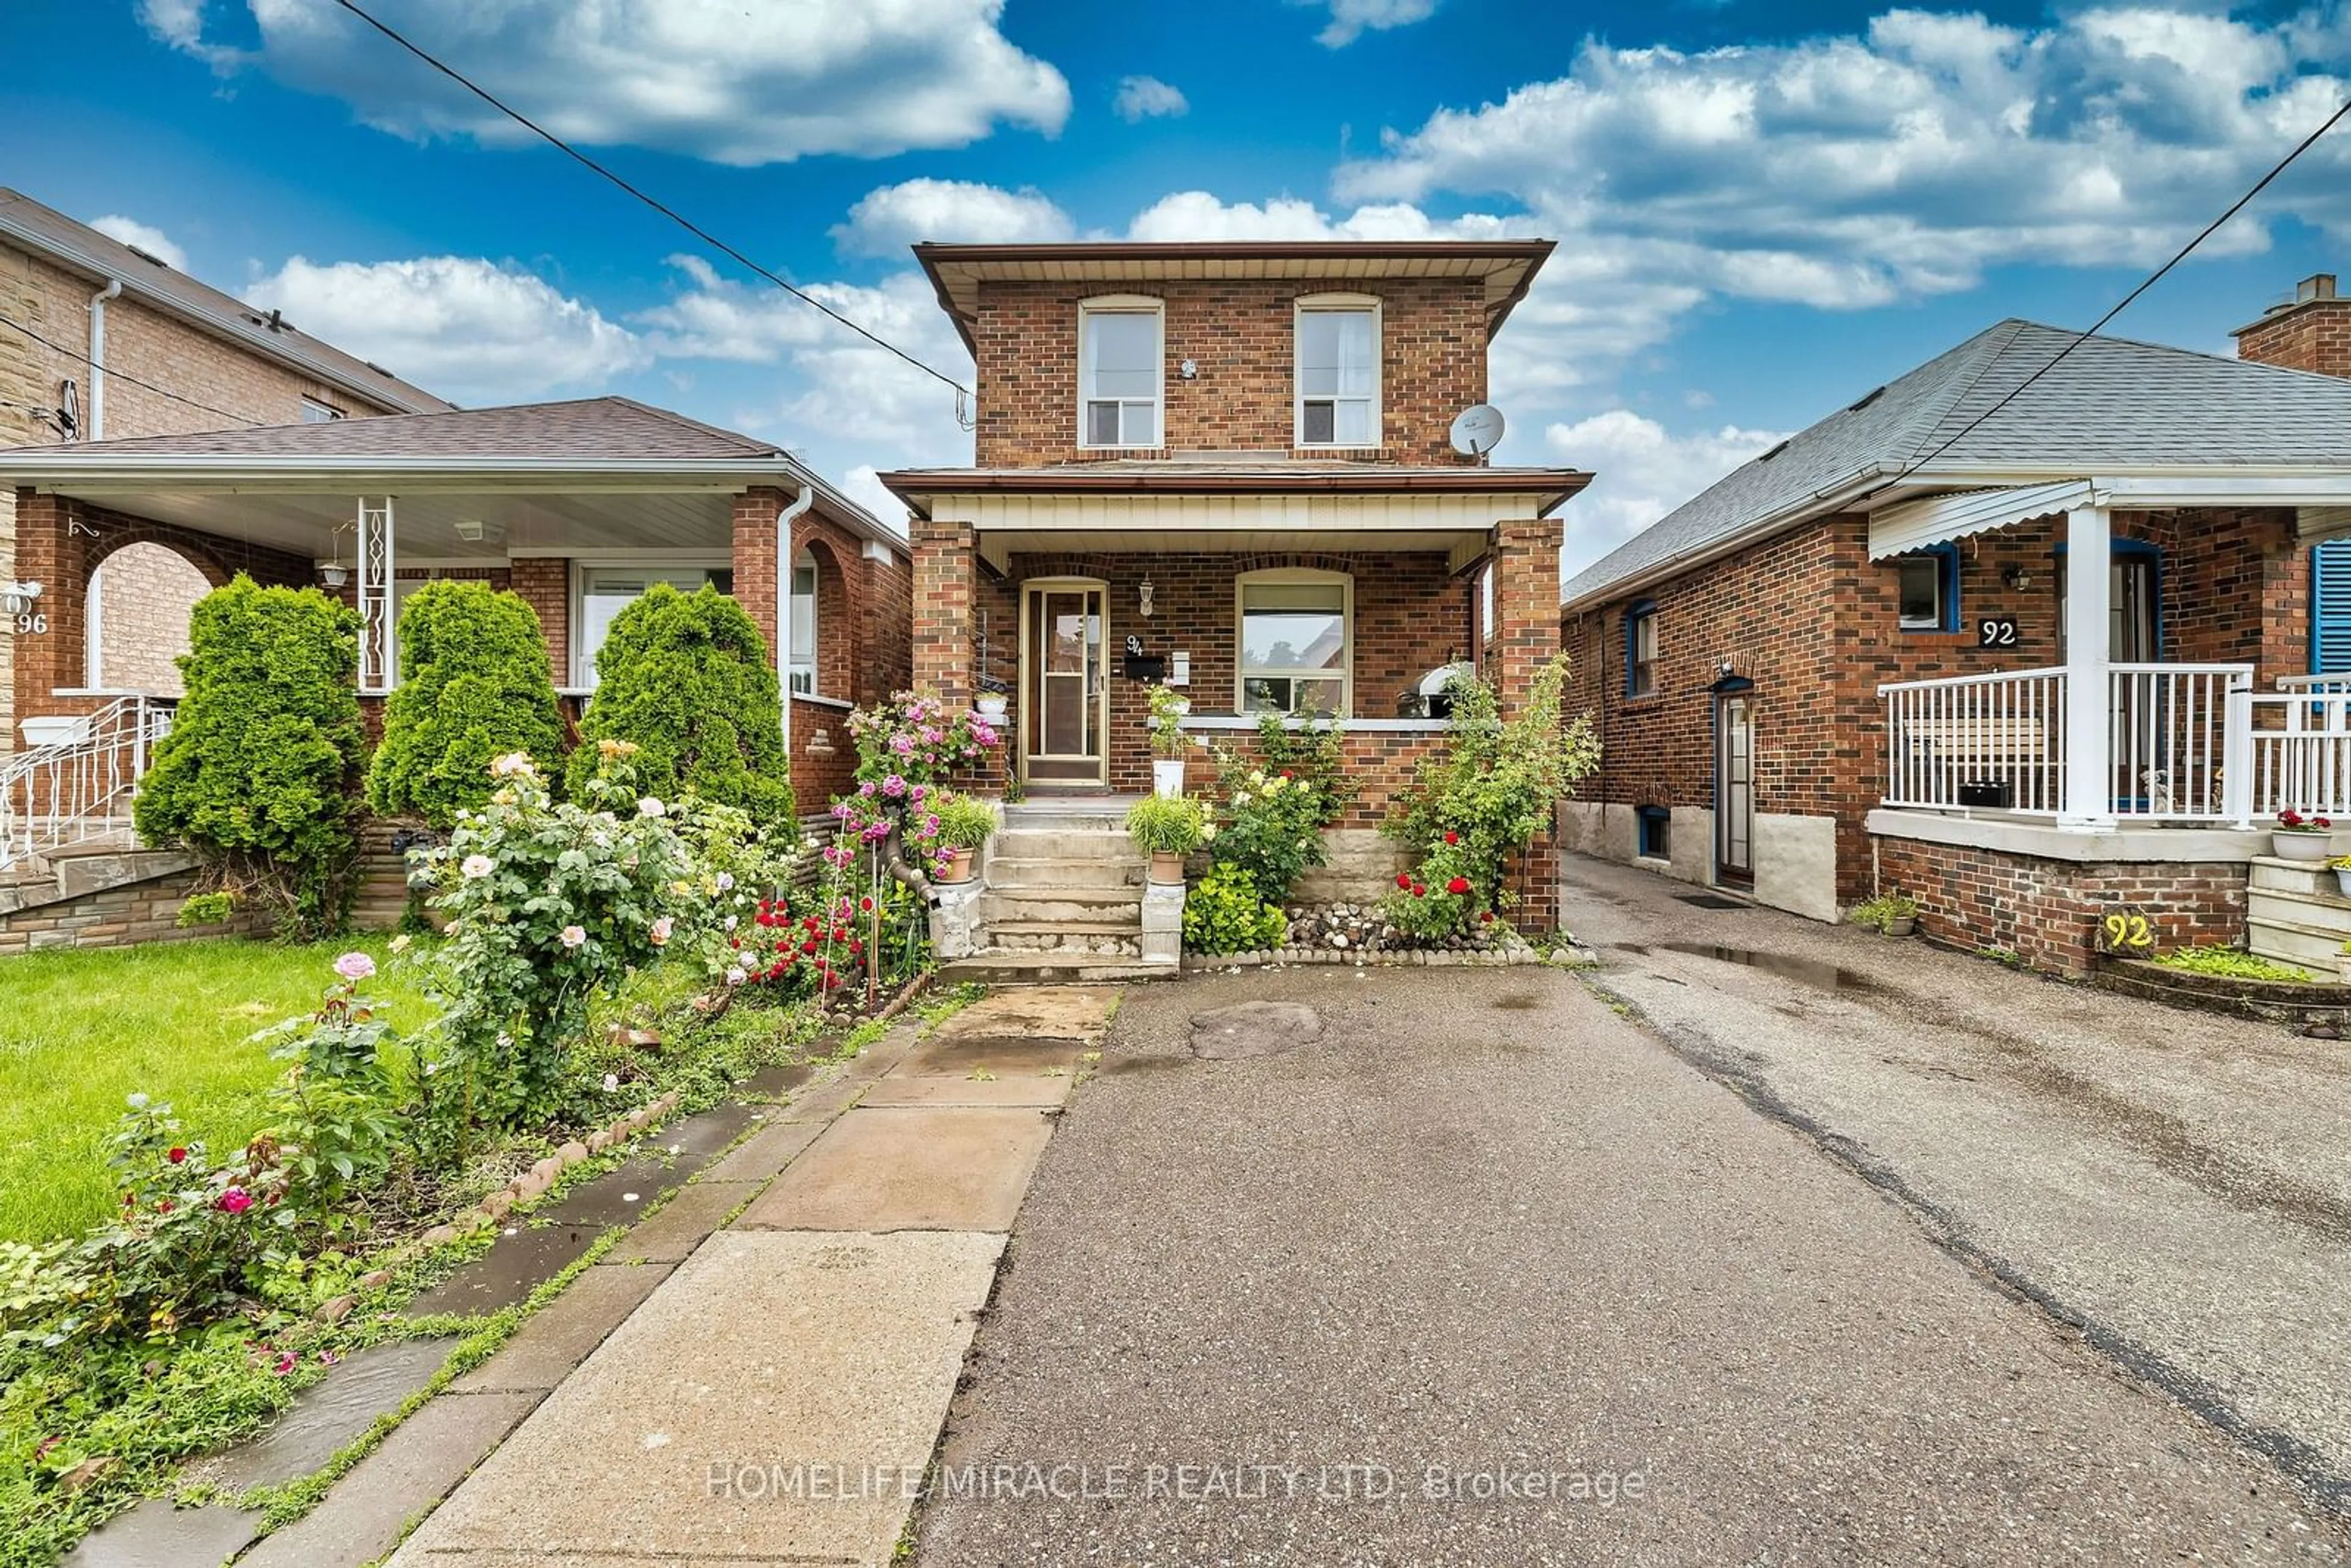 Frontside or backside of a home for 94 Ypres Rd, Toronto Ontario M6M 1P3